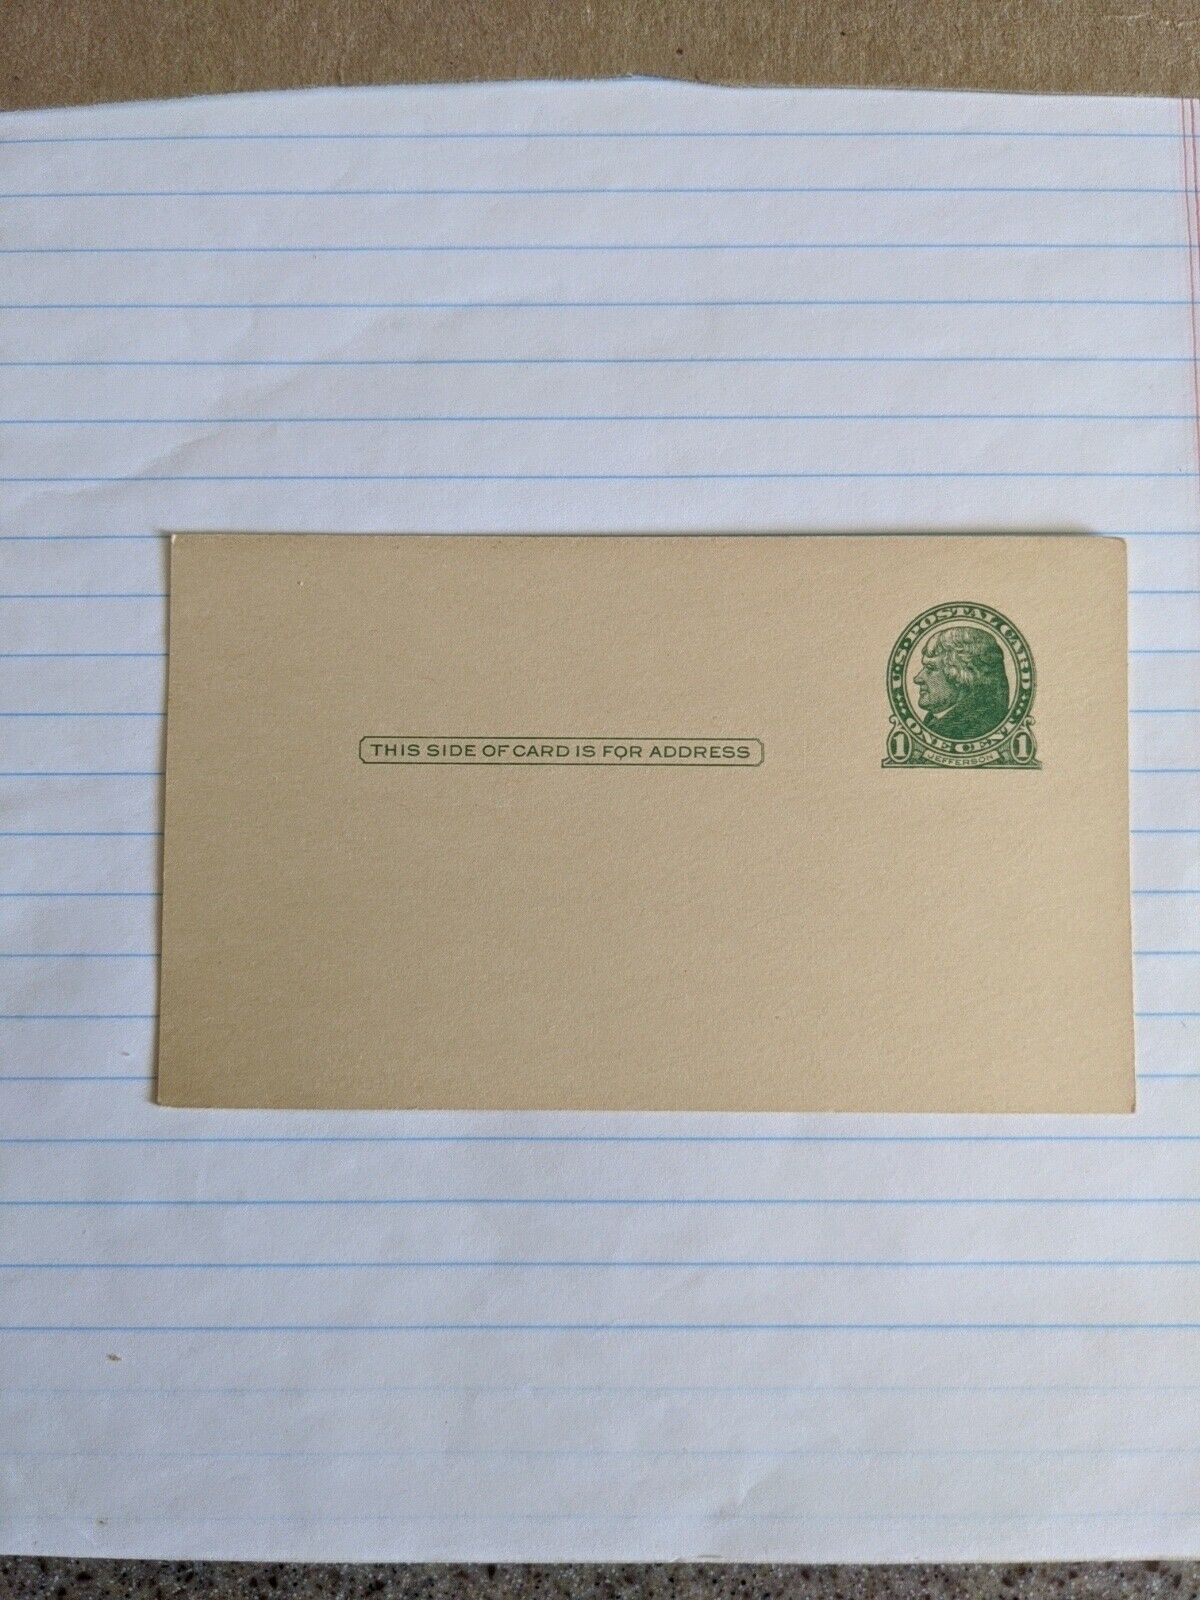 Thomas Jefferson 1 Cent, Pre-Stamped, Green-United States Post Office-Postcard.